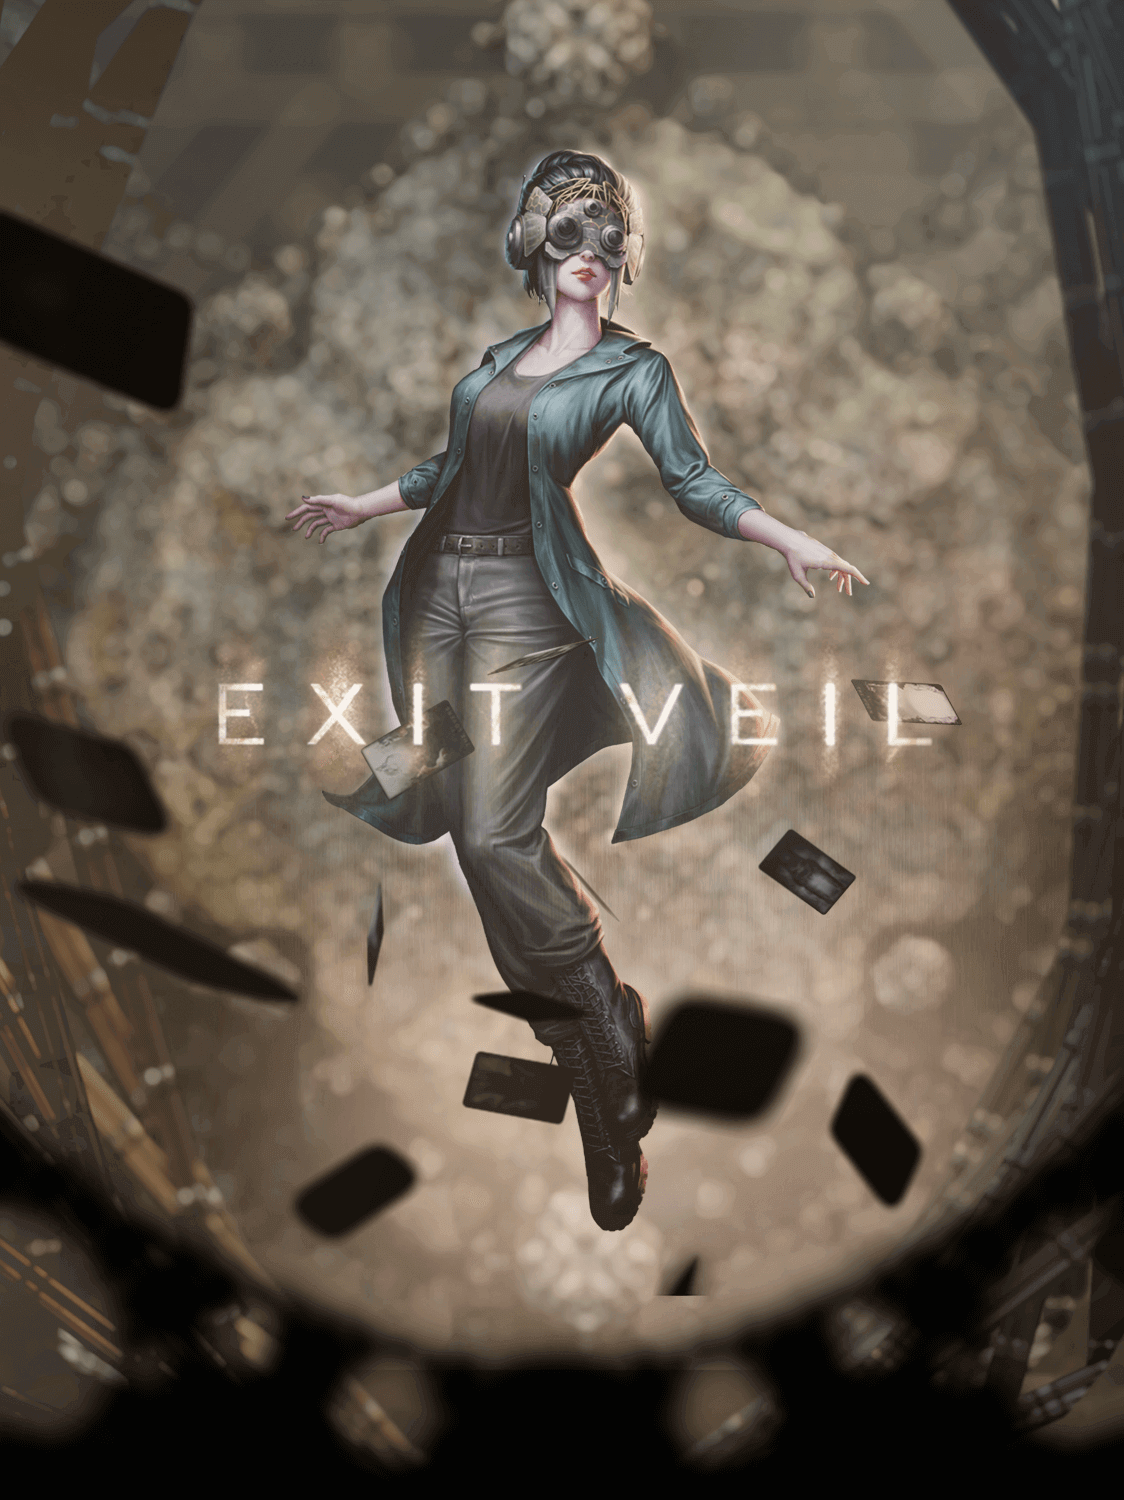 Exit Veil Image featuring main character Tori